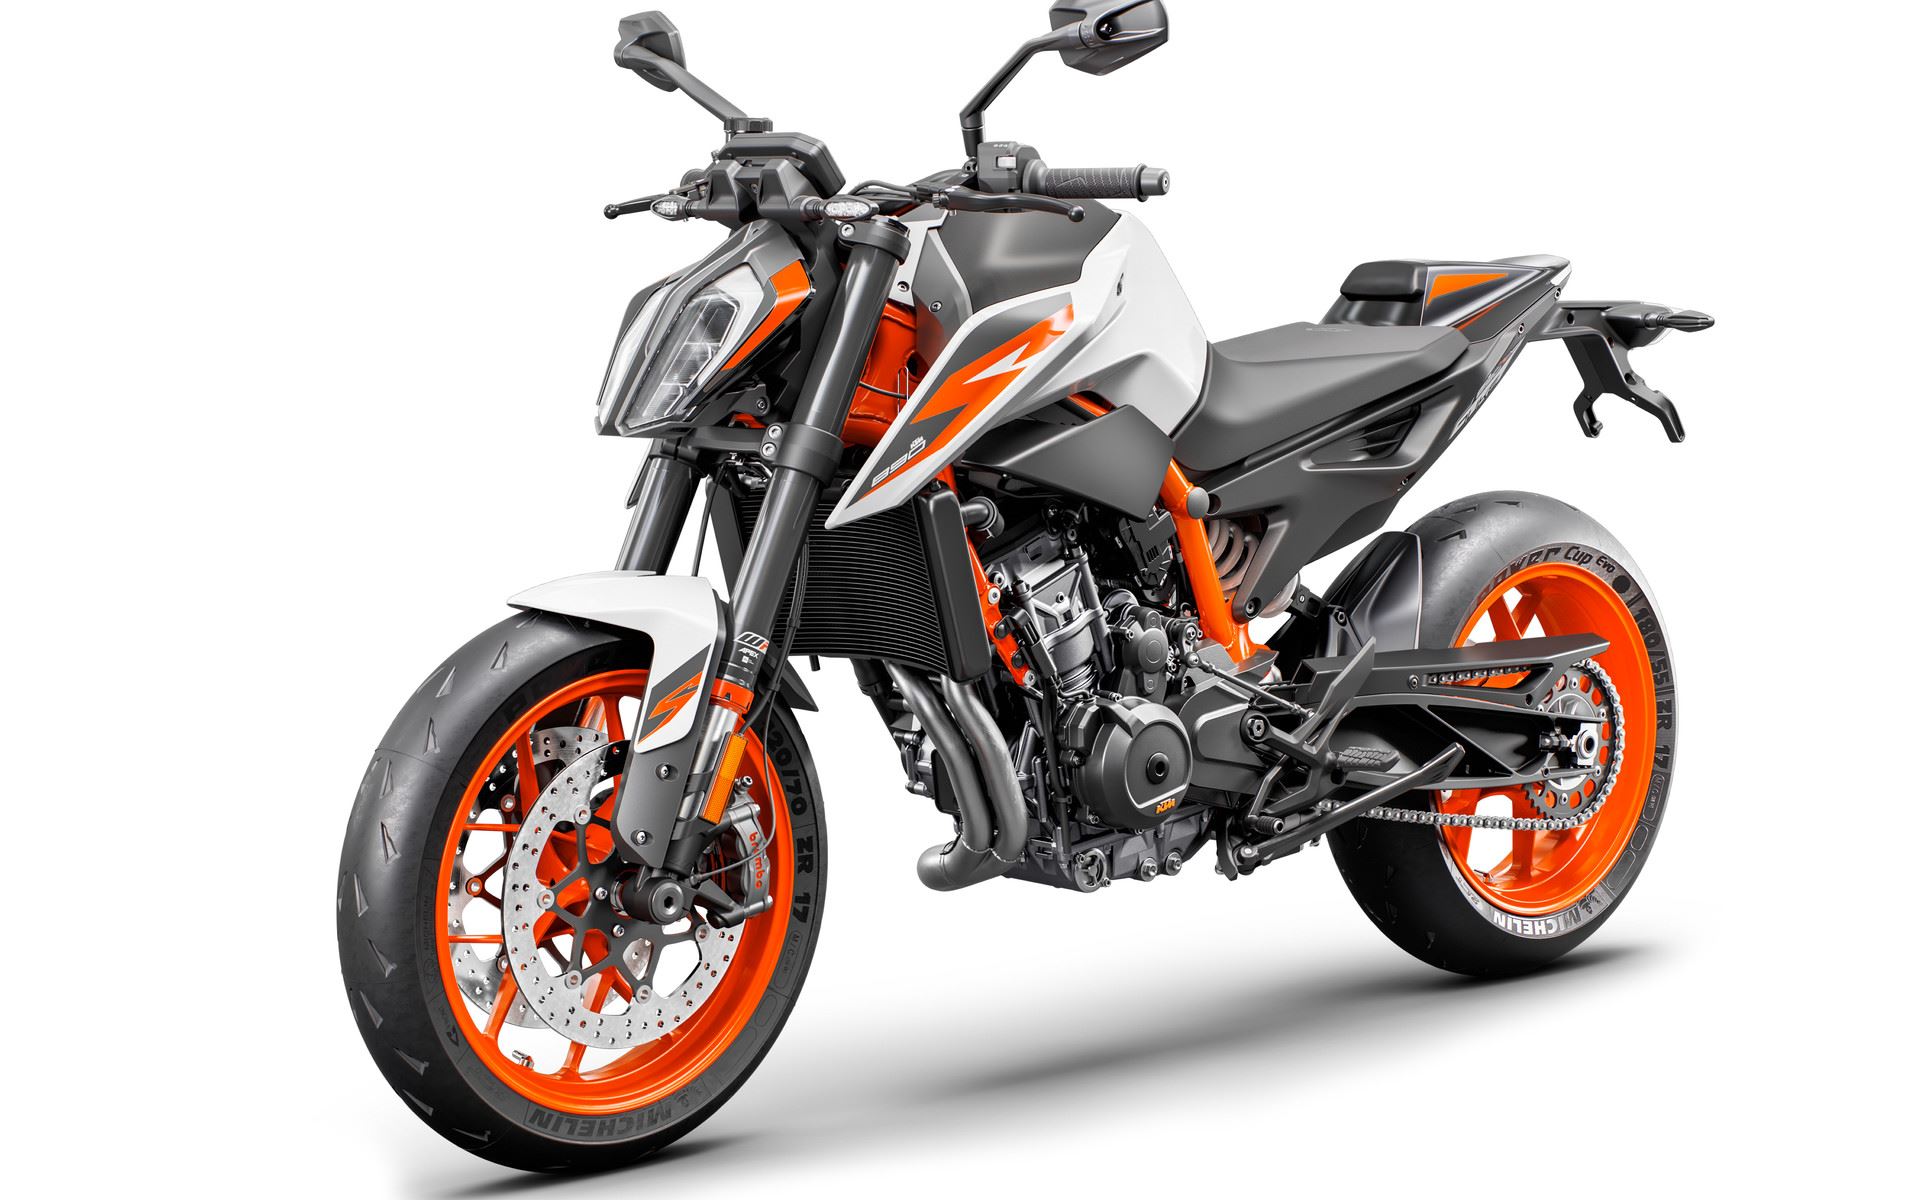 <p>KTM&#39;s middleweight naked, the 790 Duke, has been due for a more hardcore R model, and the result is the 2020 890 Duke R!&nbsp;<a href="http://overdrive.in/news-cars-auto/eicma-2019-brand-new-ktm-890-duke-r-revealed/">More details here</a>.</p>